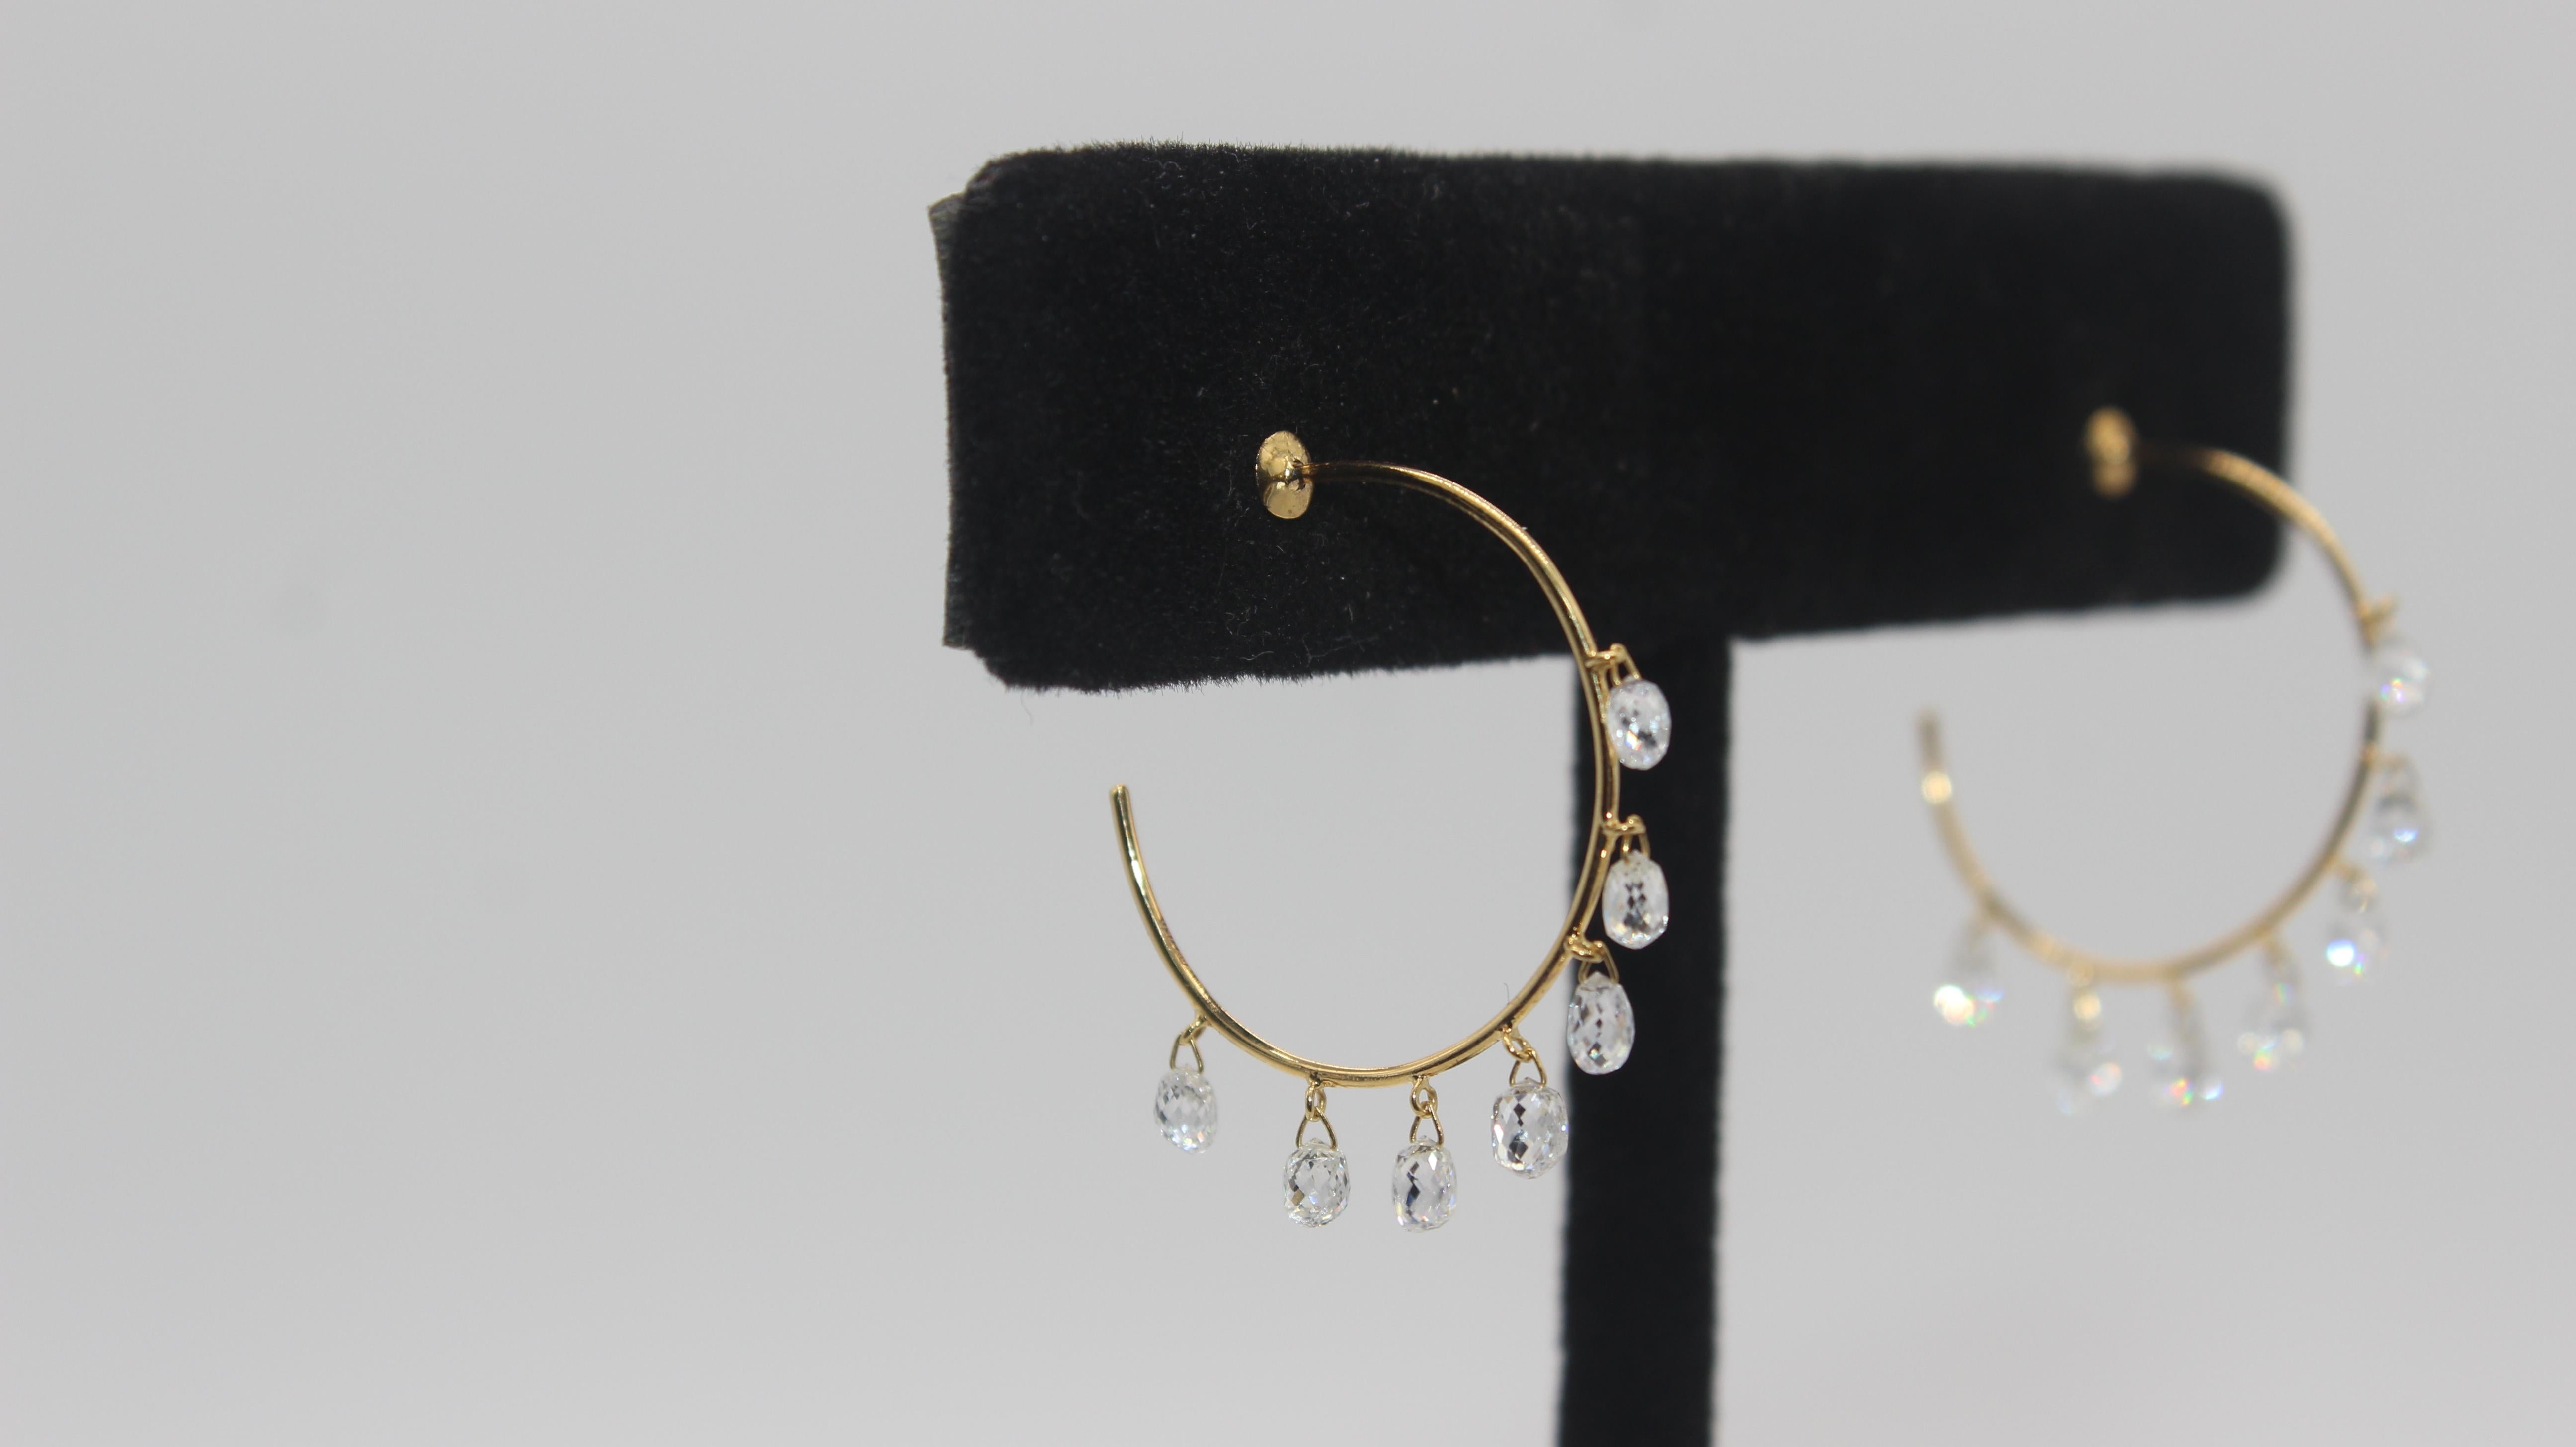 Elevate your attire and make a statement with the sparkling diamond hoop earrings to boost your everyday look. Up your hoop game by adding pendants and make it truly personal. Set in 18ct Rose Gold, each hoop contains 7 ethically sourced diamond